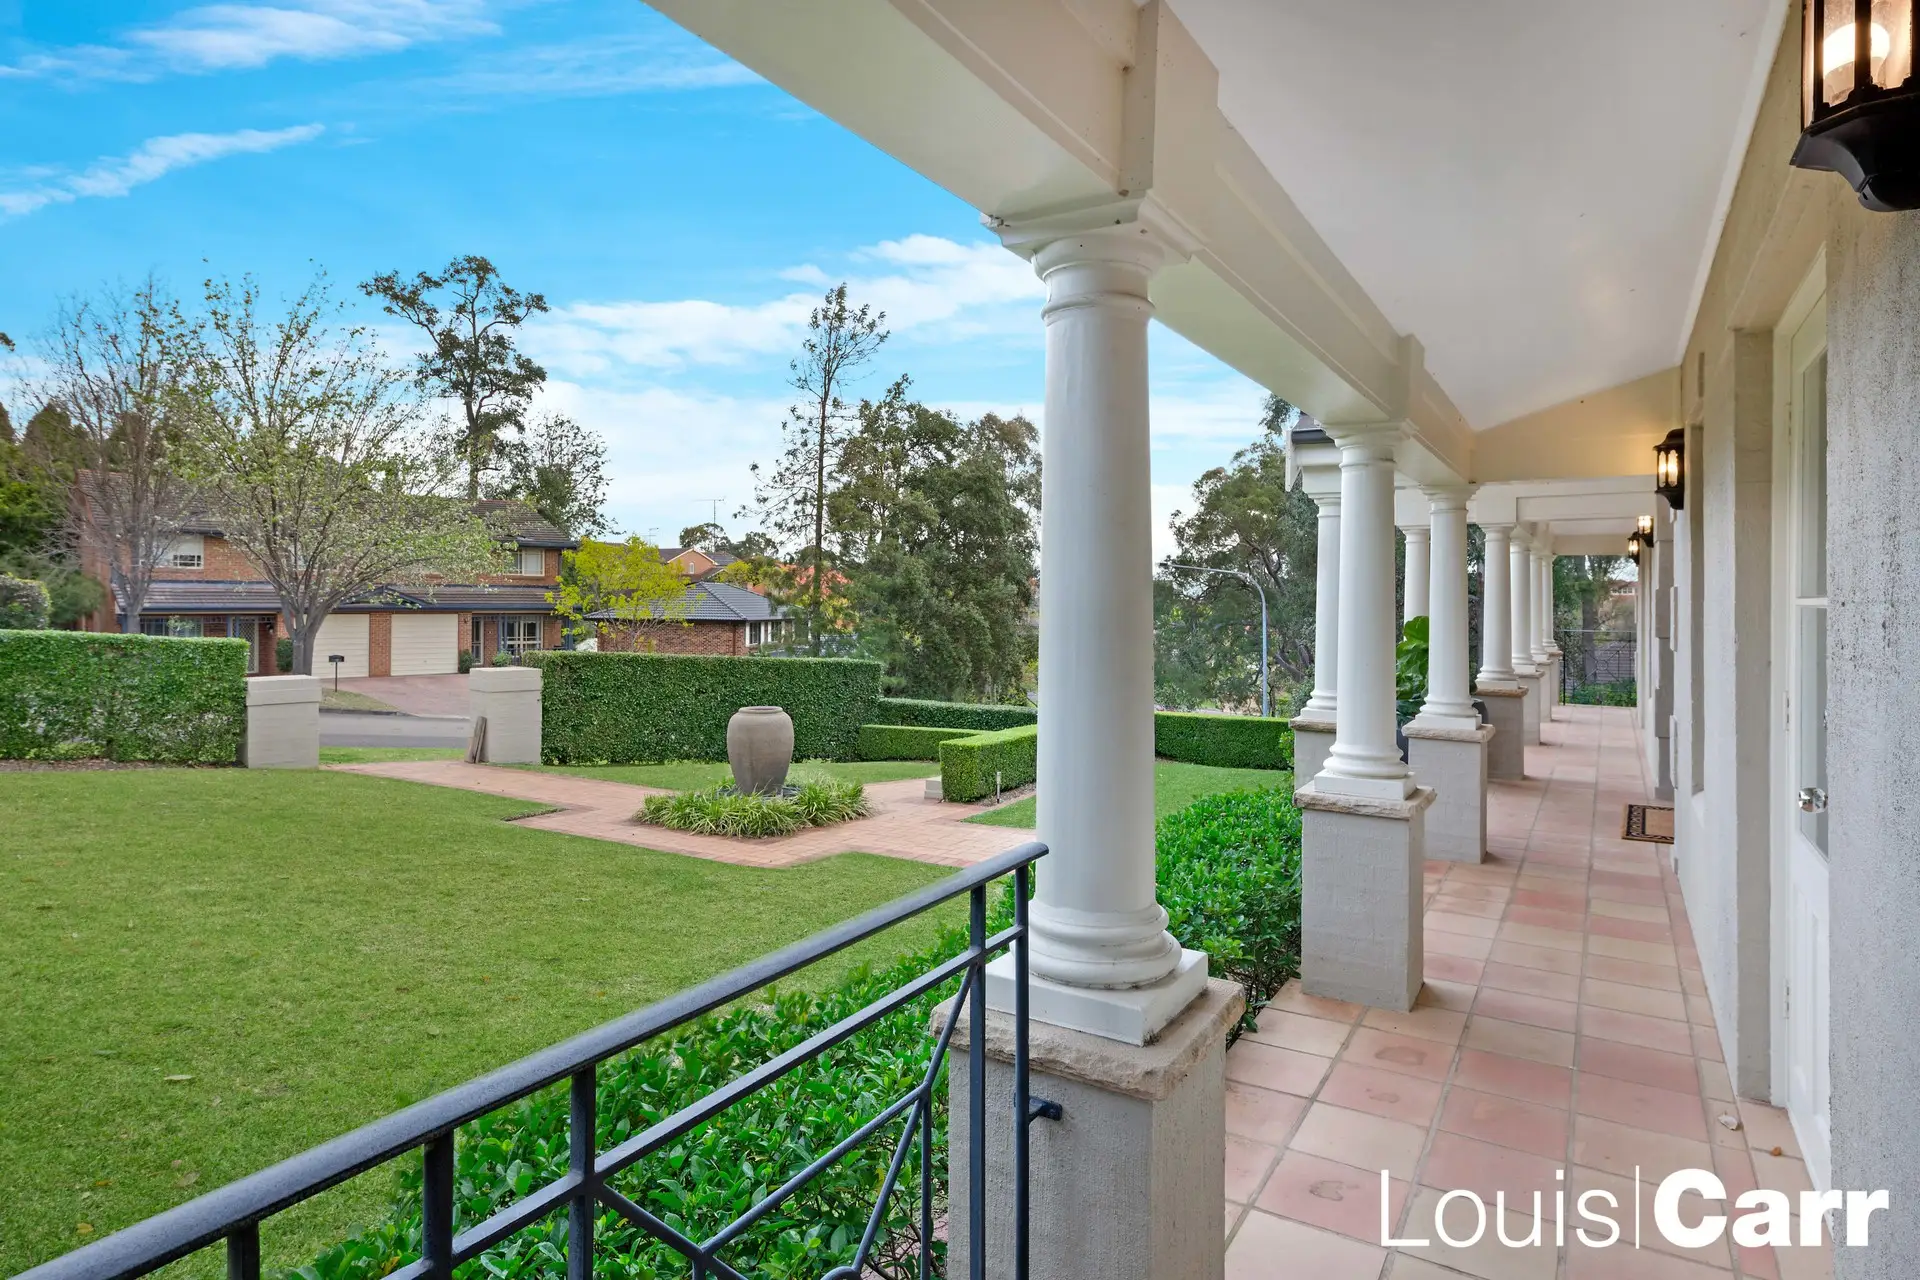 Photo #2: 8 Crego Road, Glenhaven - Sold by Louis Carr Real Estate